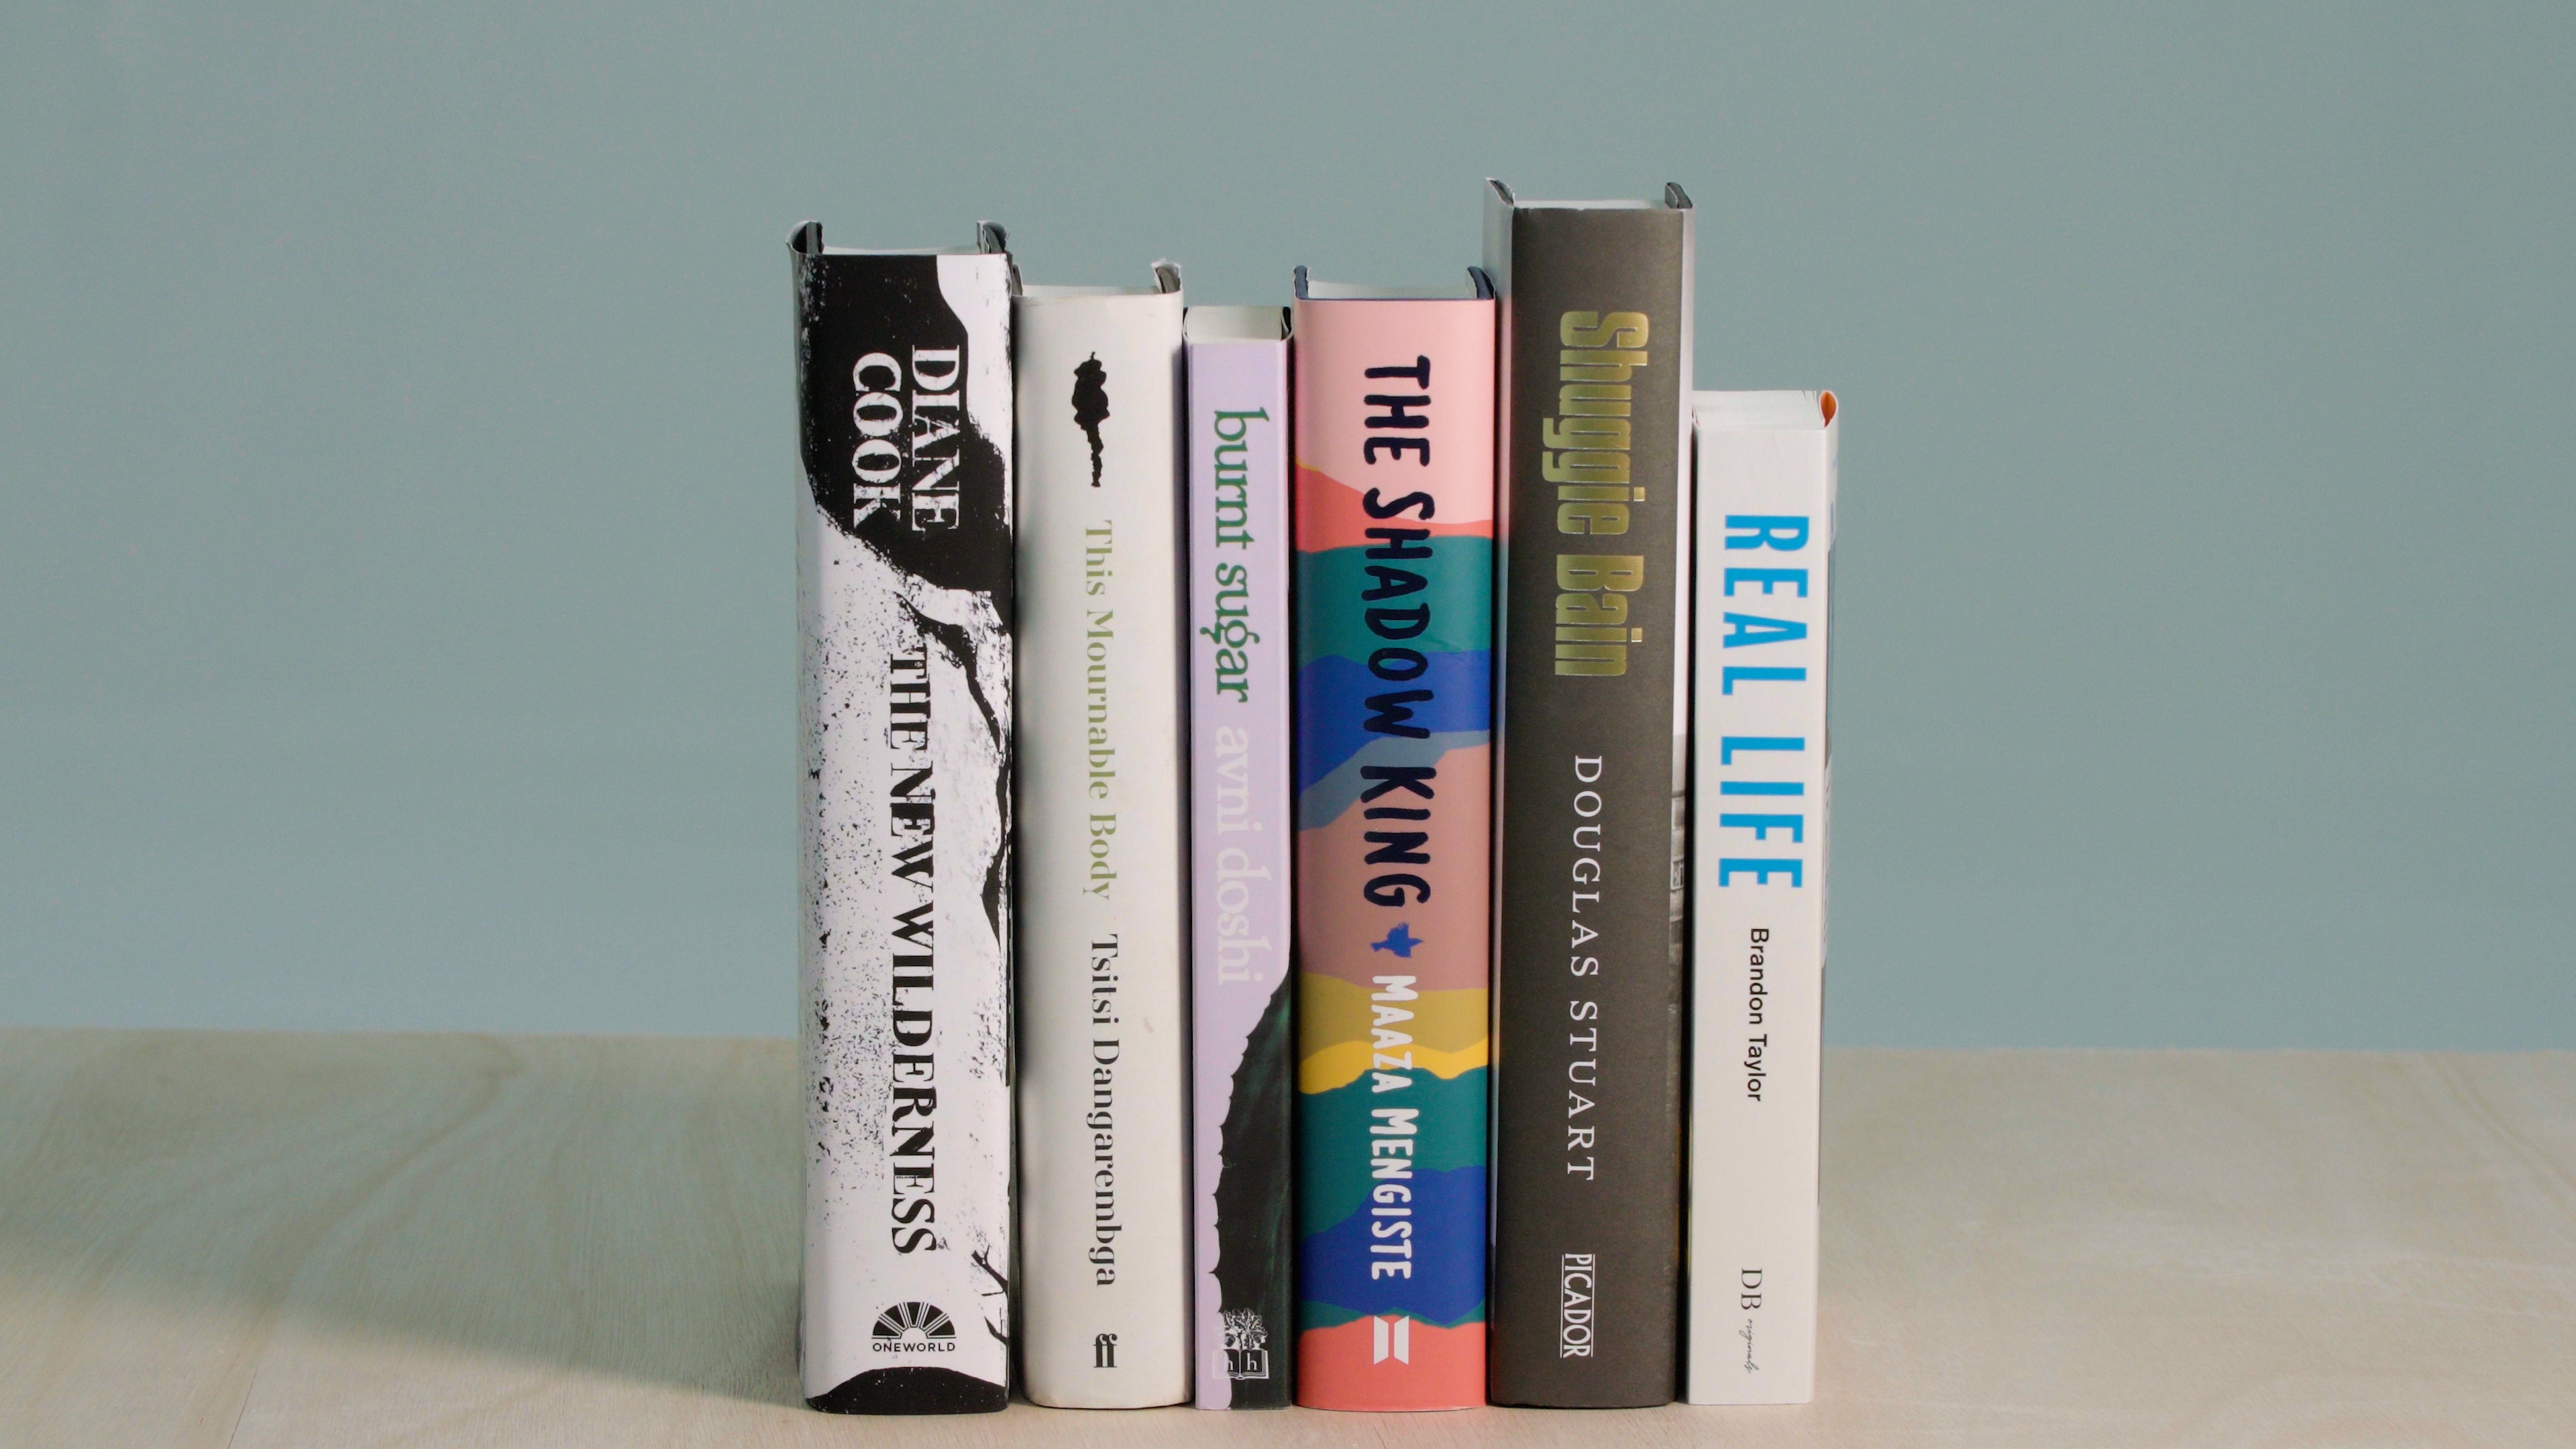 All six books shortlisted for the 2020 Booker Prize